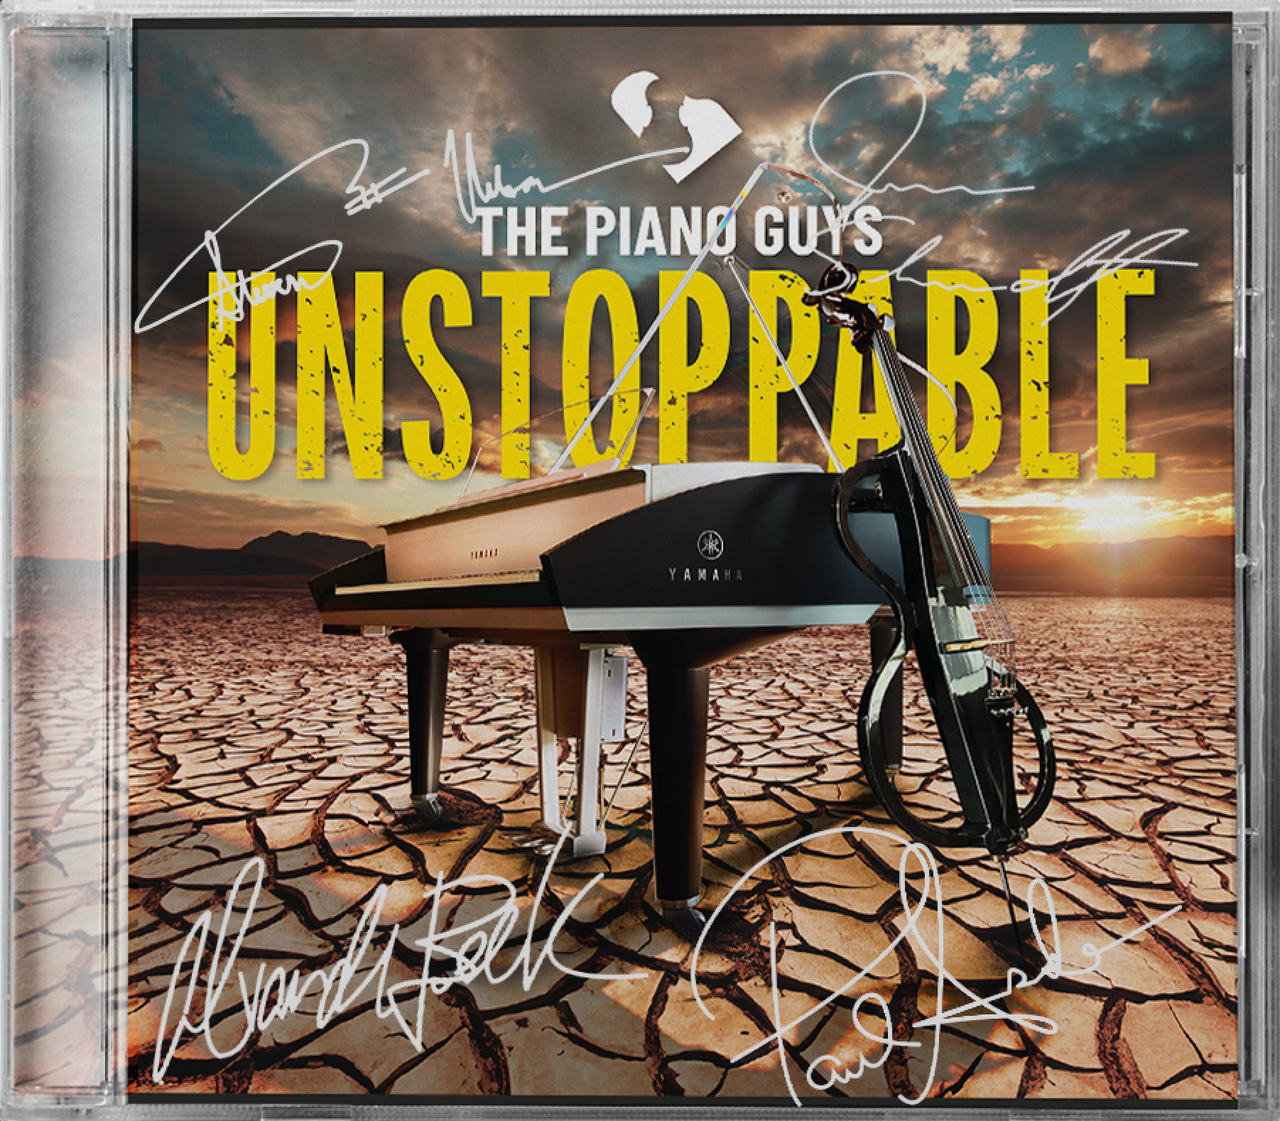 The Piano Guys "Unstoppable"